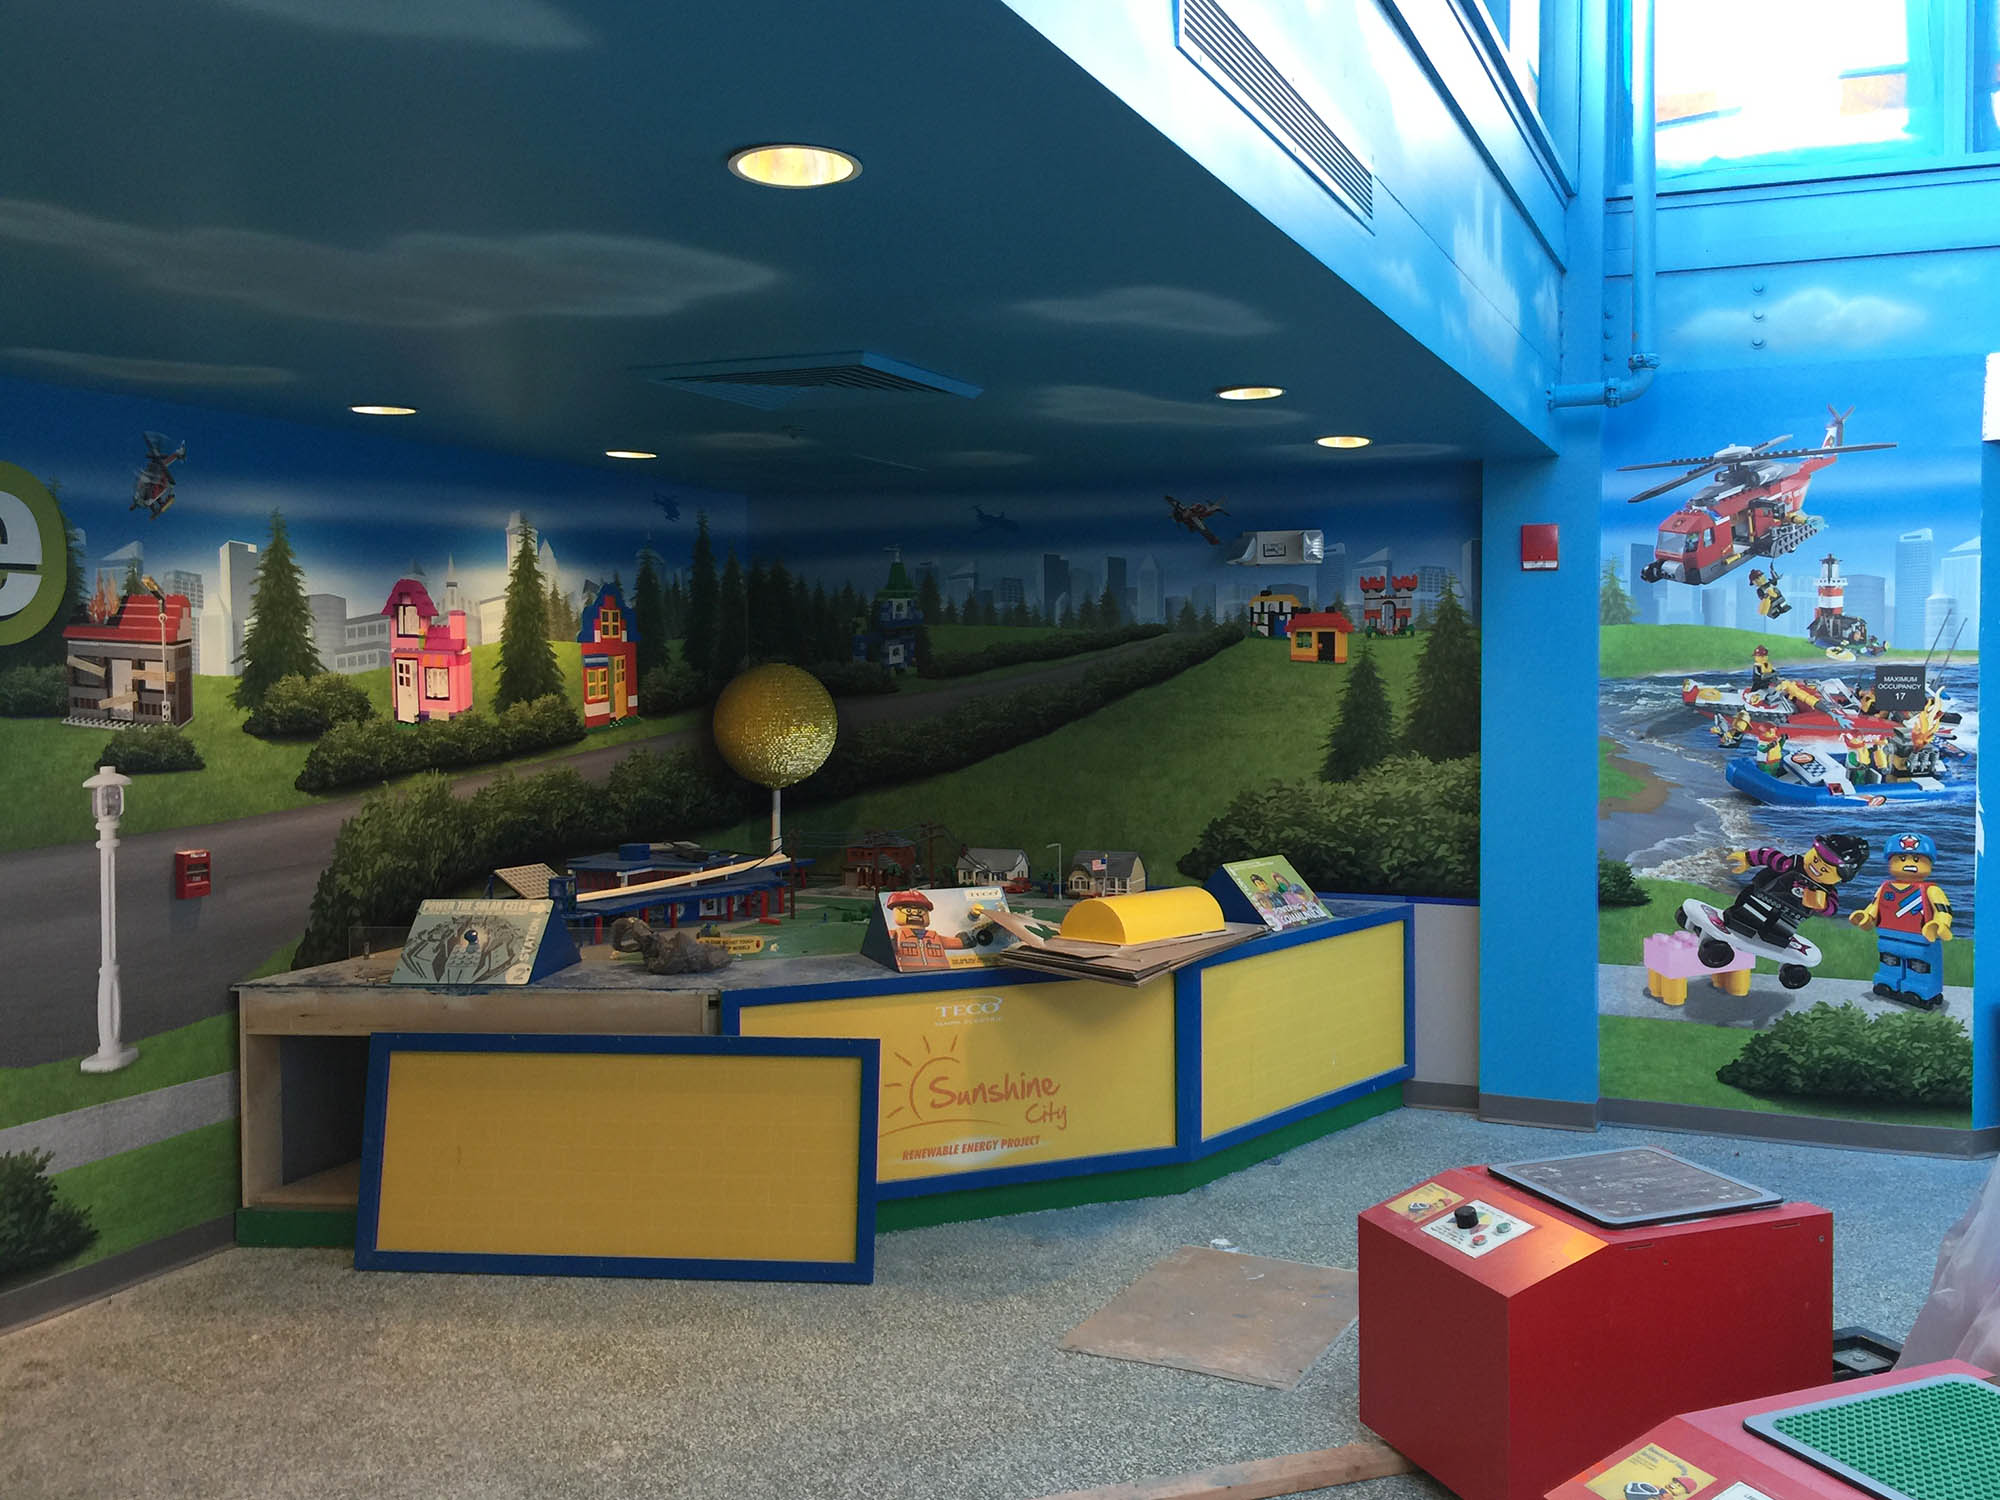 Installing graphic wall wraps and counter wraps for Wheels Zone in Legoland Florida